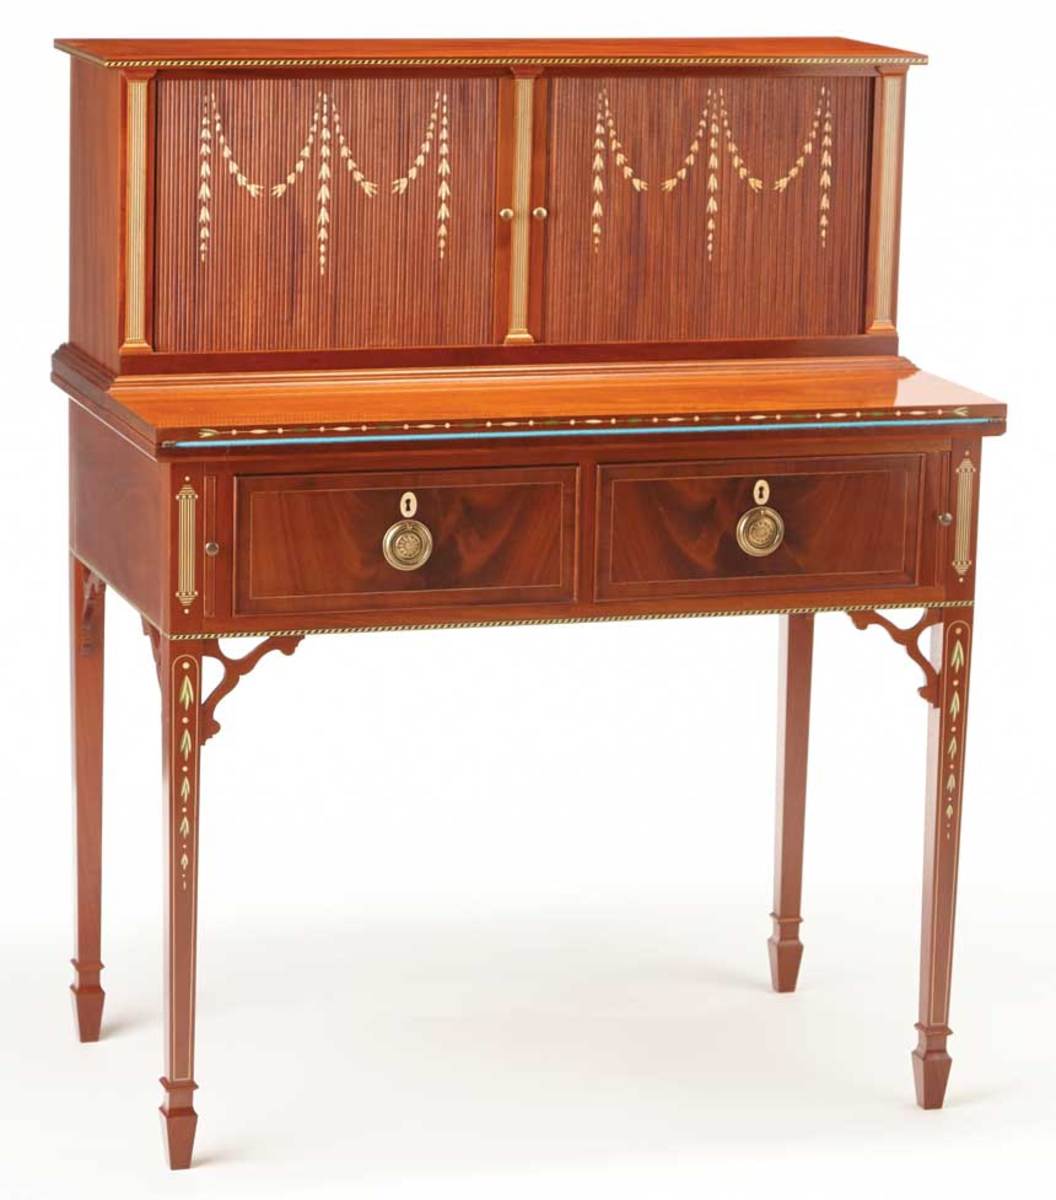 Stevenson’s Ladies Tambour Desk, in the Winterthur Museum’s collection, is a reproduction of John Seymour’s desk, circa 1793-1796.